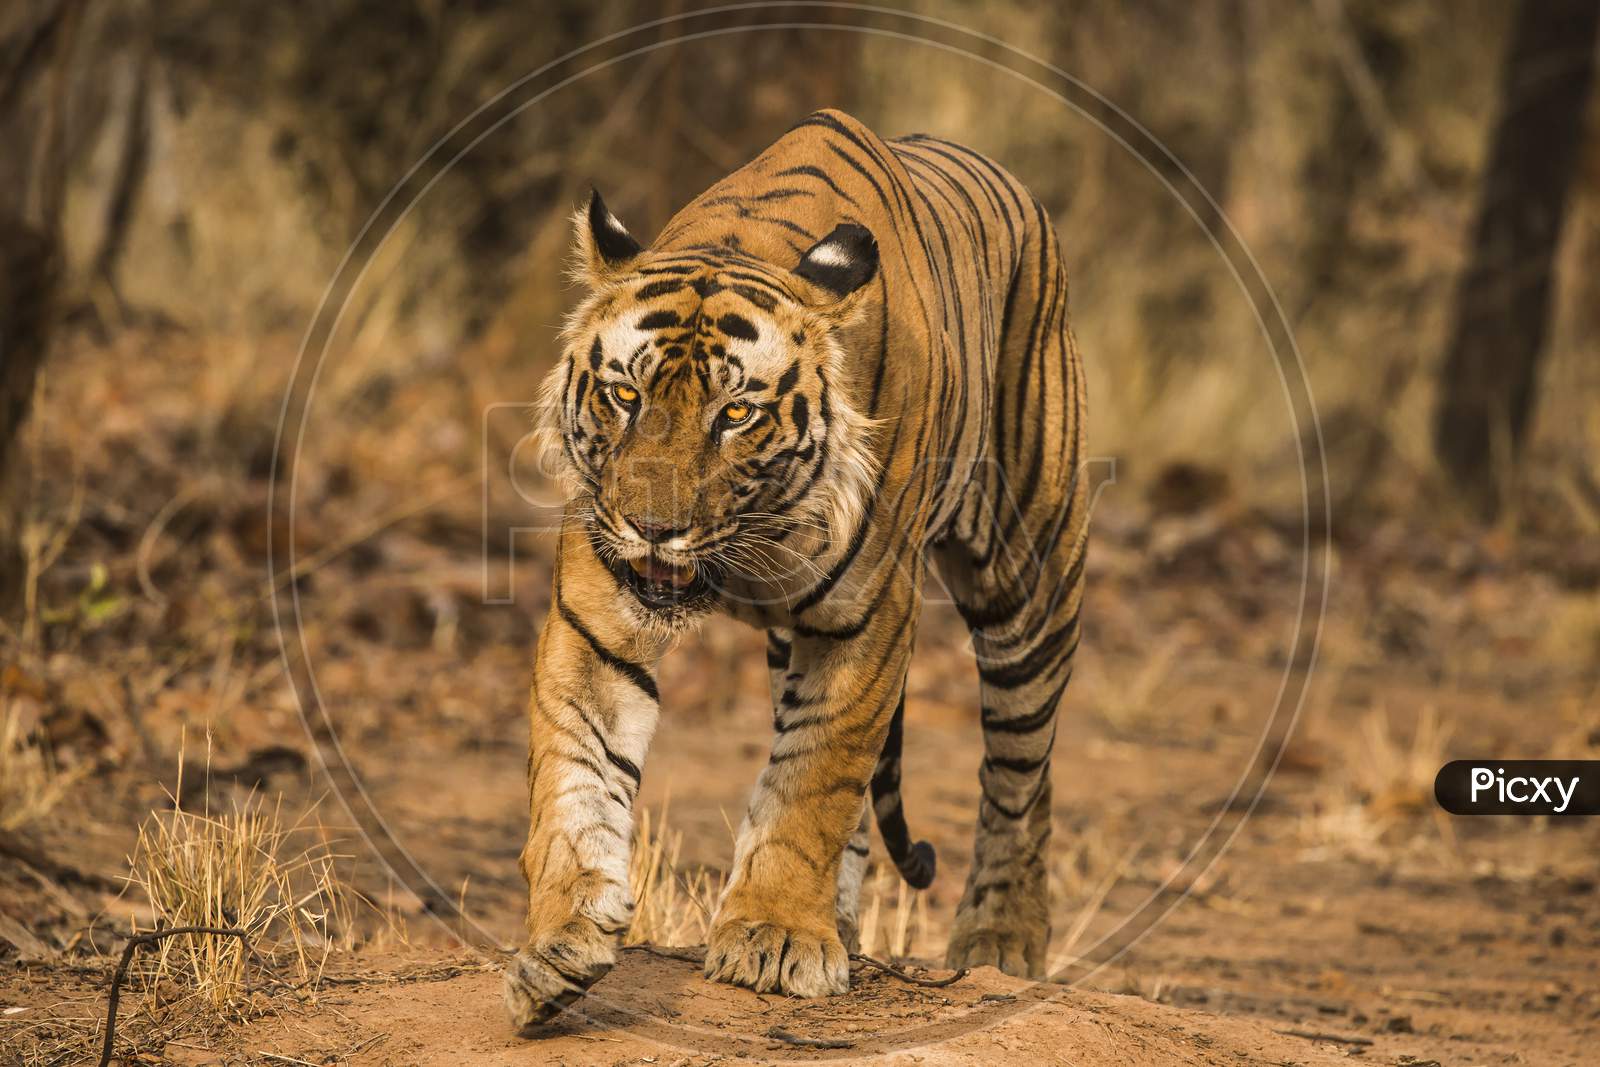 A Tiger or Bengal Tiger walking in Forest